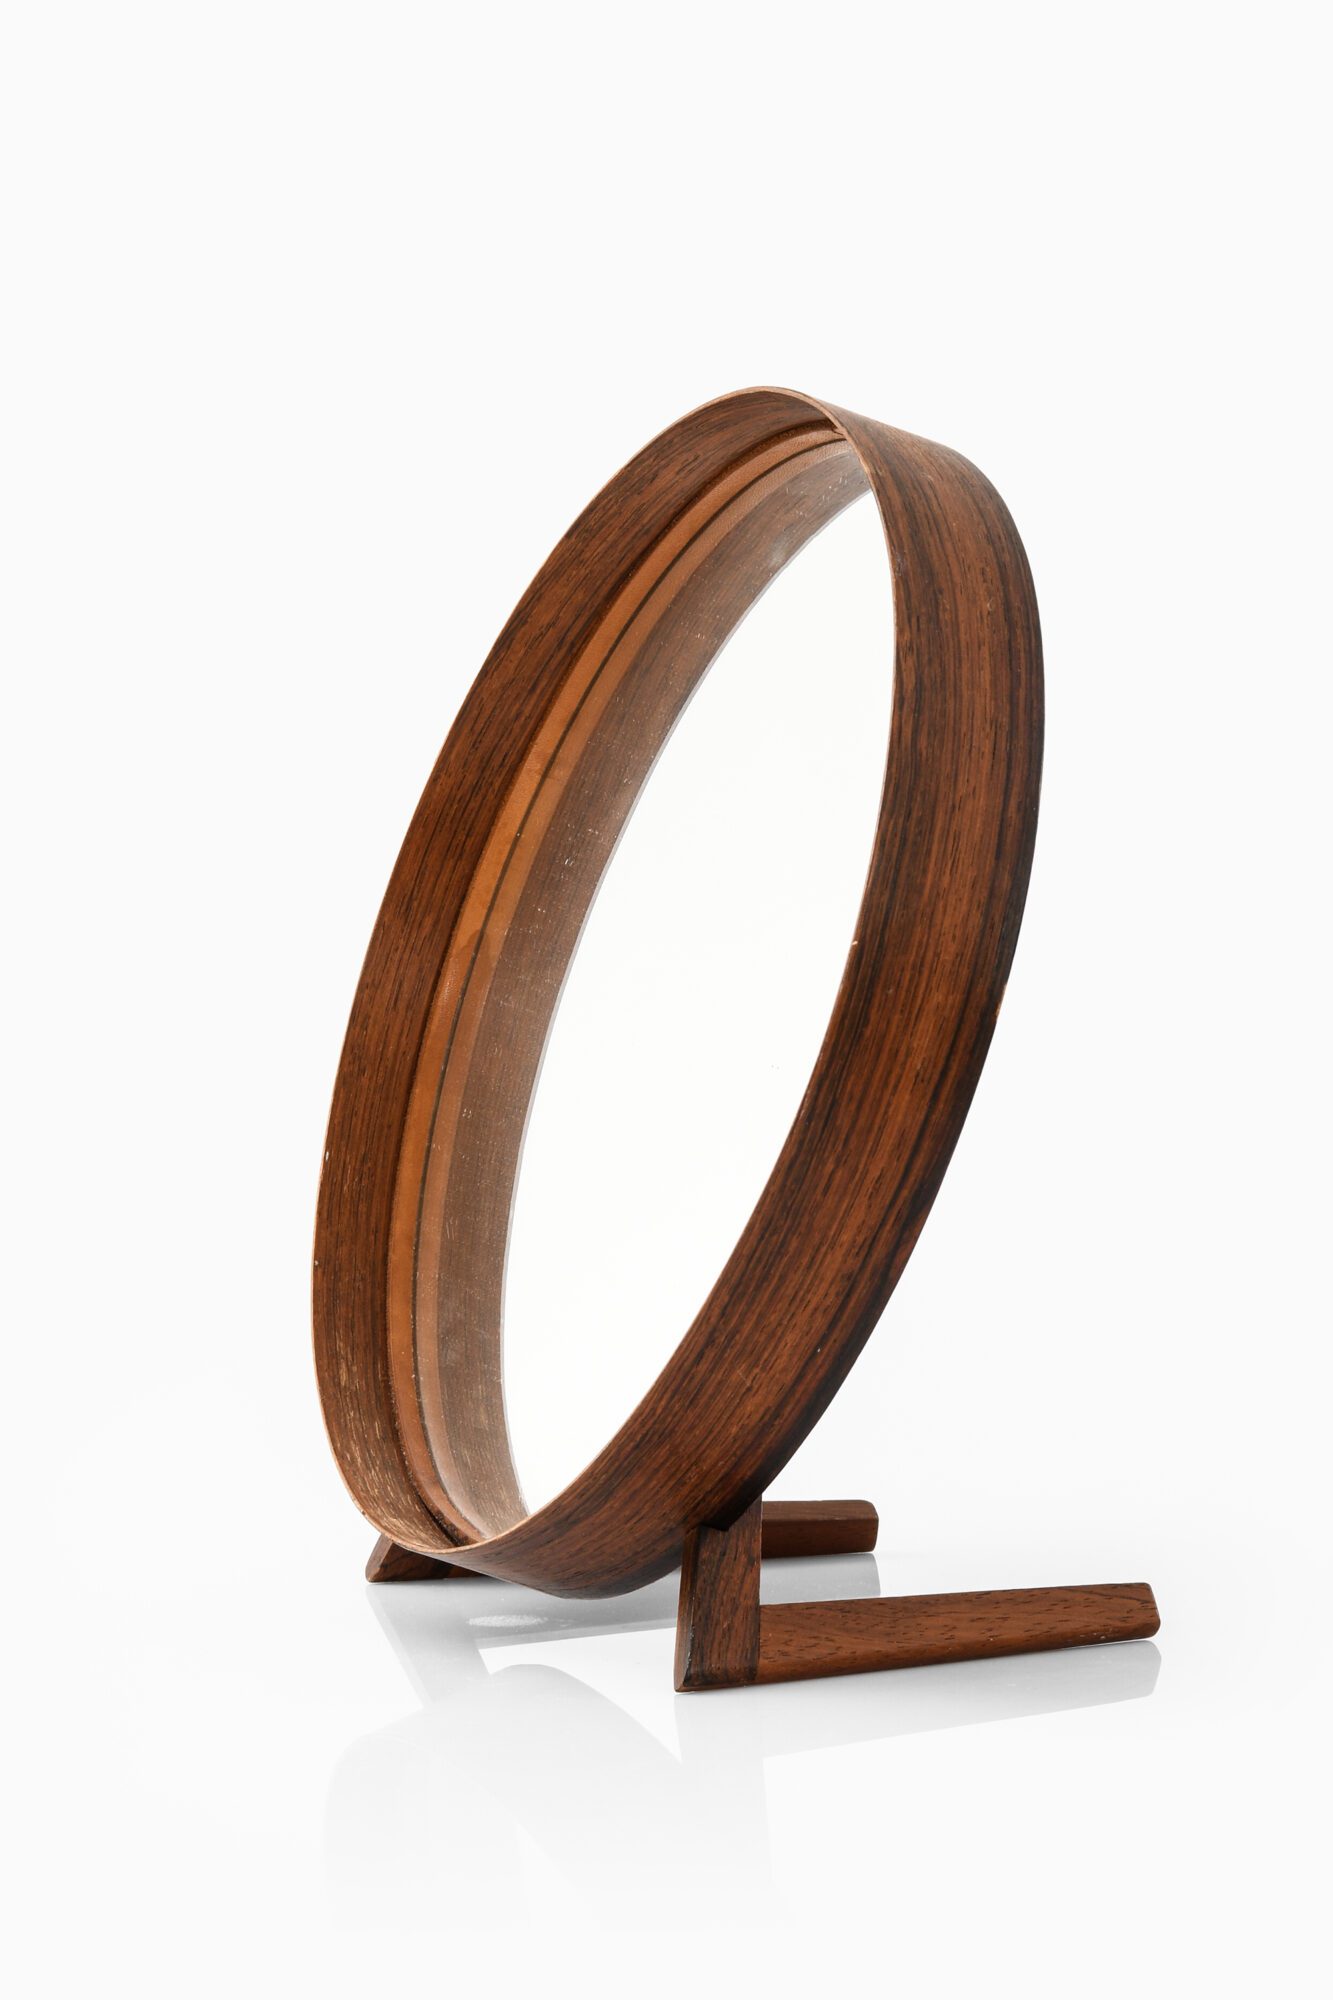 Nils Troed table mirror in rosewood at Studio Schalling